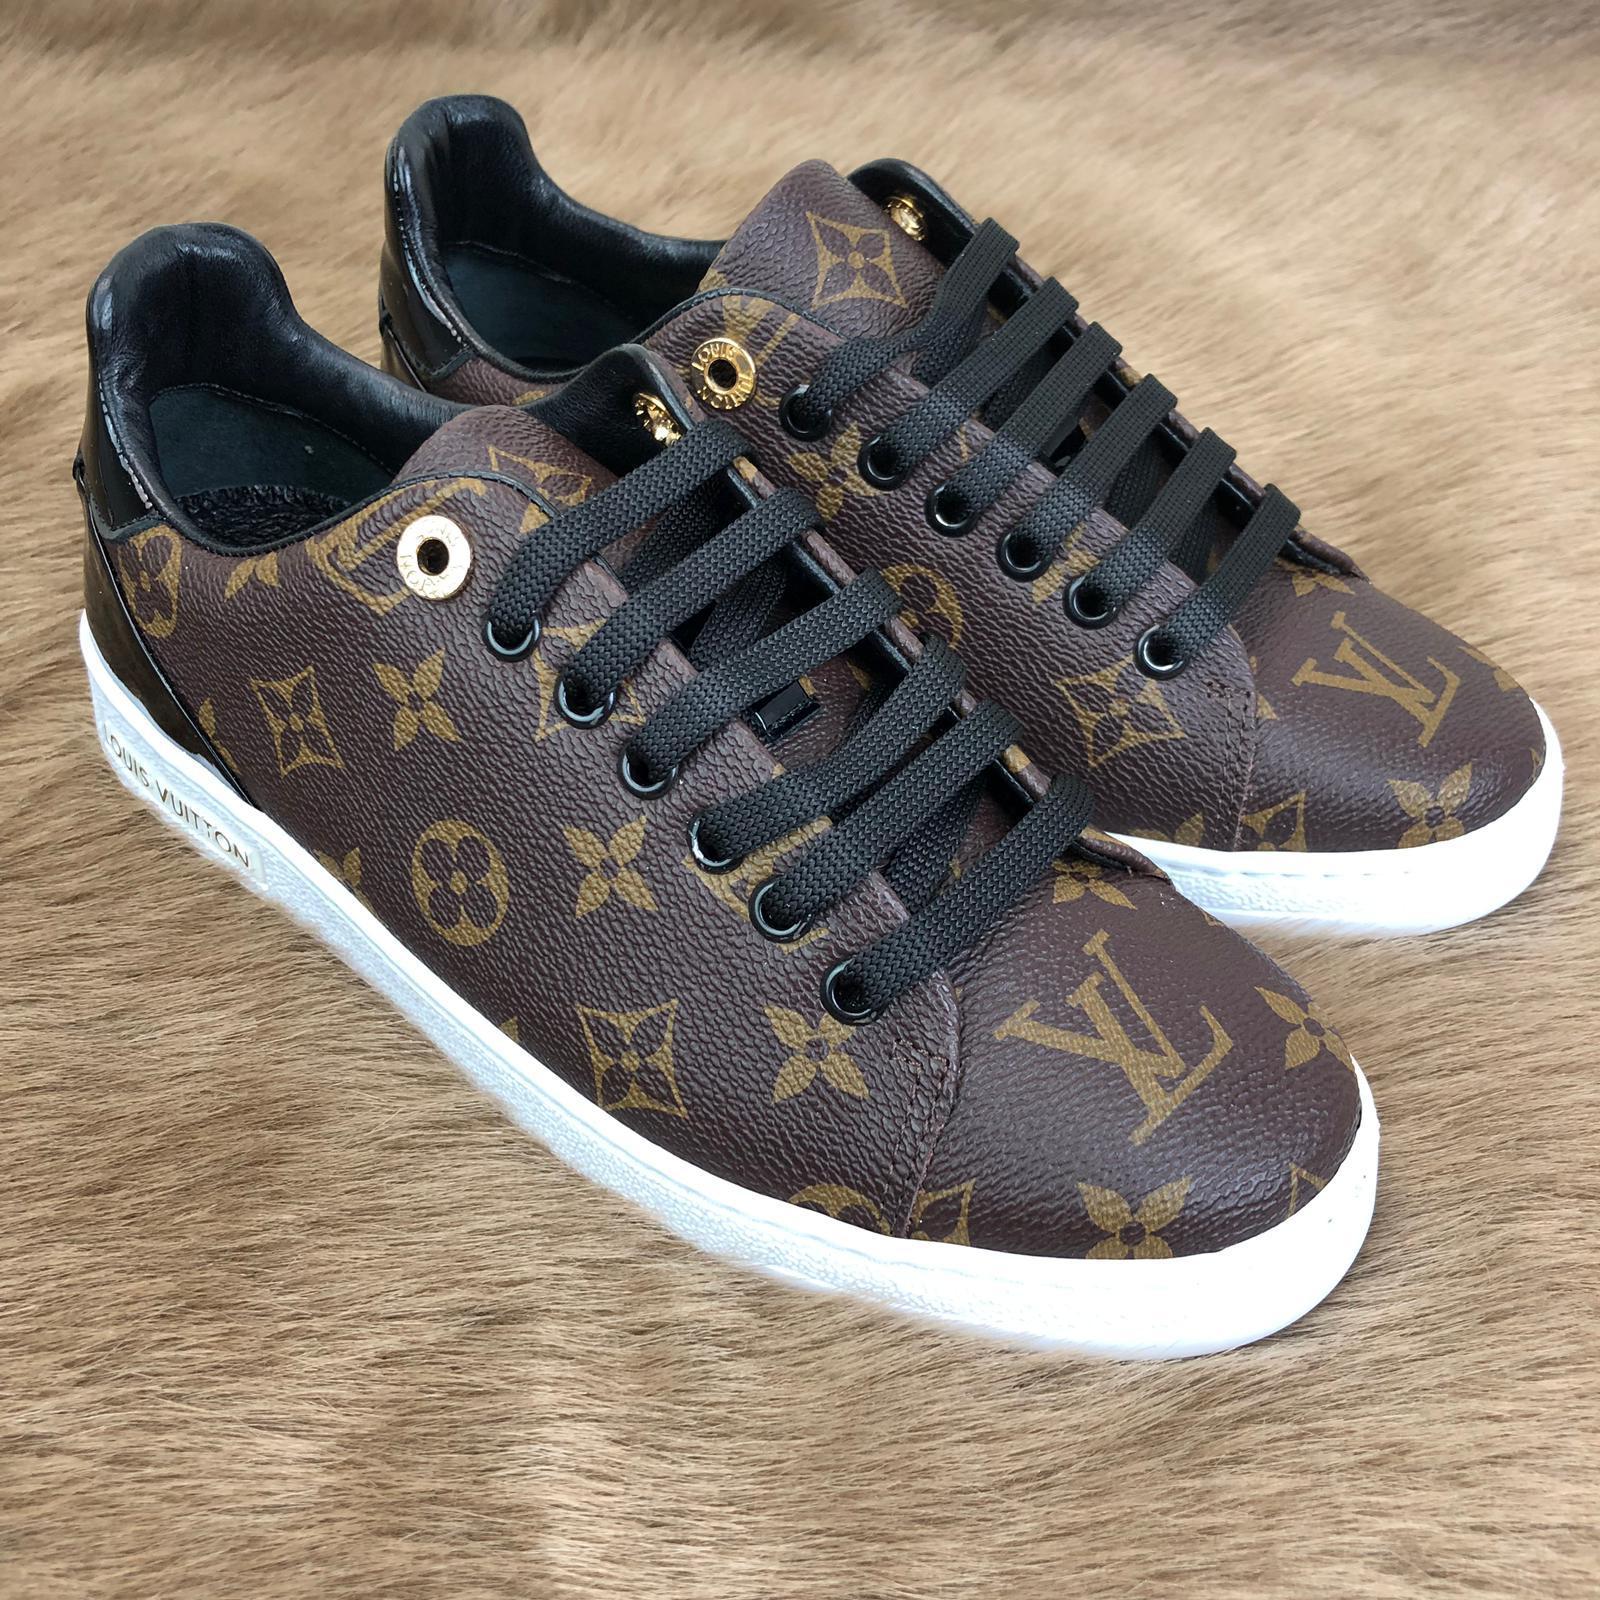 louis vuitton sneakers frontrow